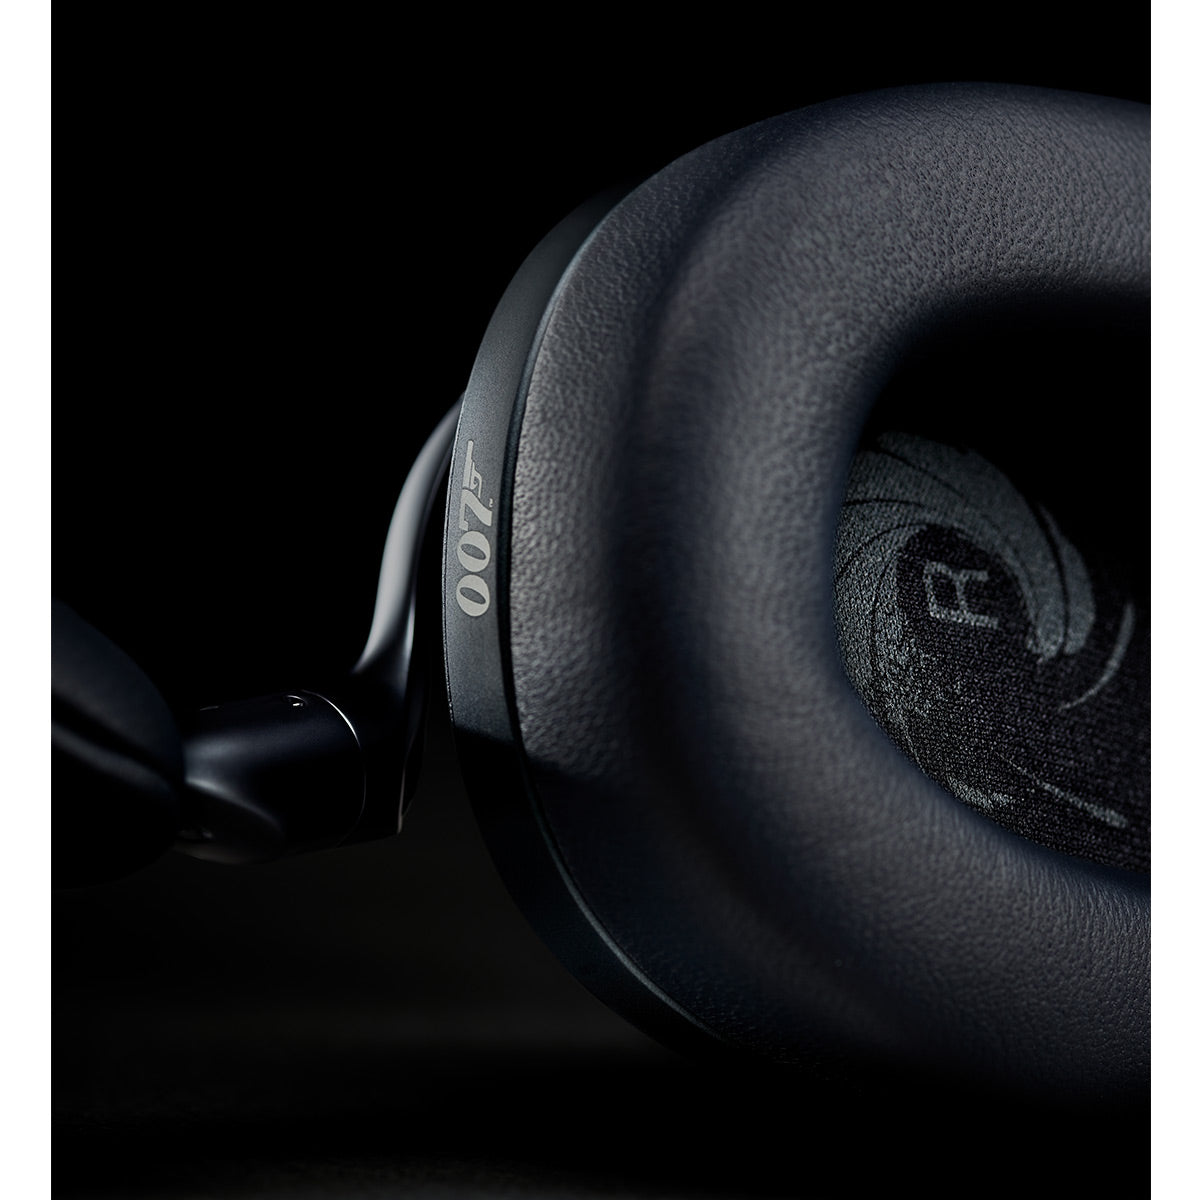 Bowers & Wilkins Px8 007 Special Edition James Bond Bluetooth Over-Ear Headphones with Active Noise Cancellation (Midnight Blue)